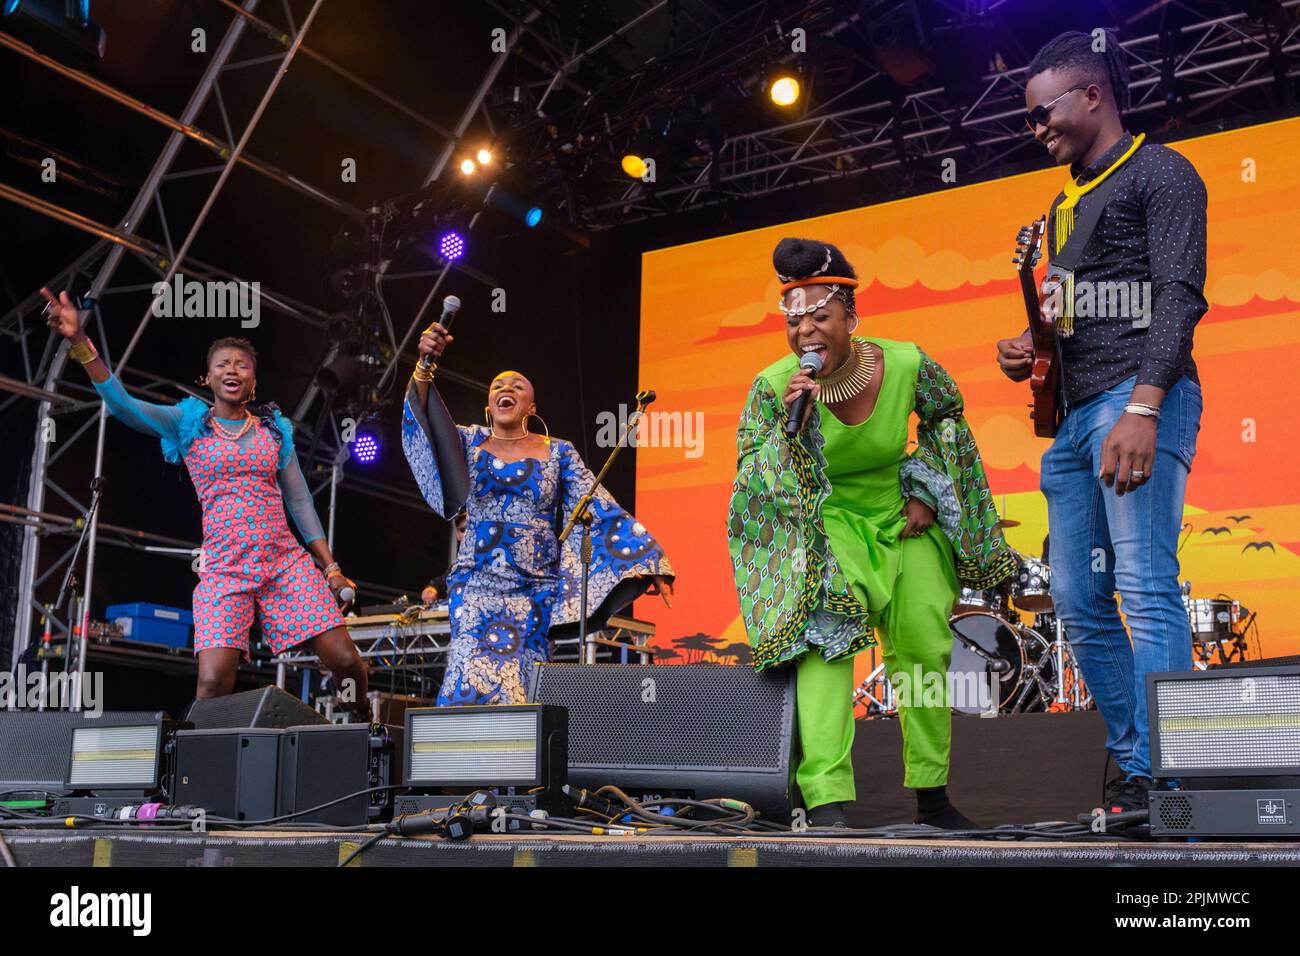 Les Amazones D'Afrique perform at the 40th Anniversary of the WOMAD Festival, Charlton Park, Malmesbury, England. July 30, 2022 Stock Photo